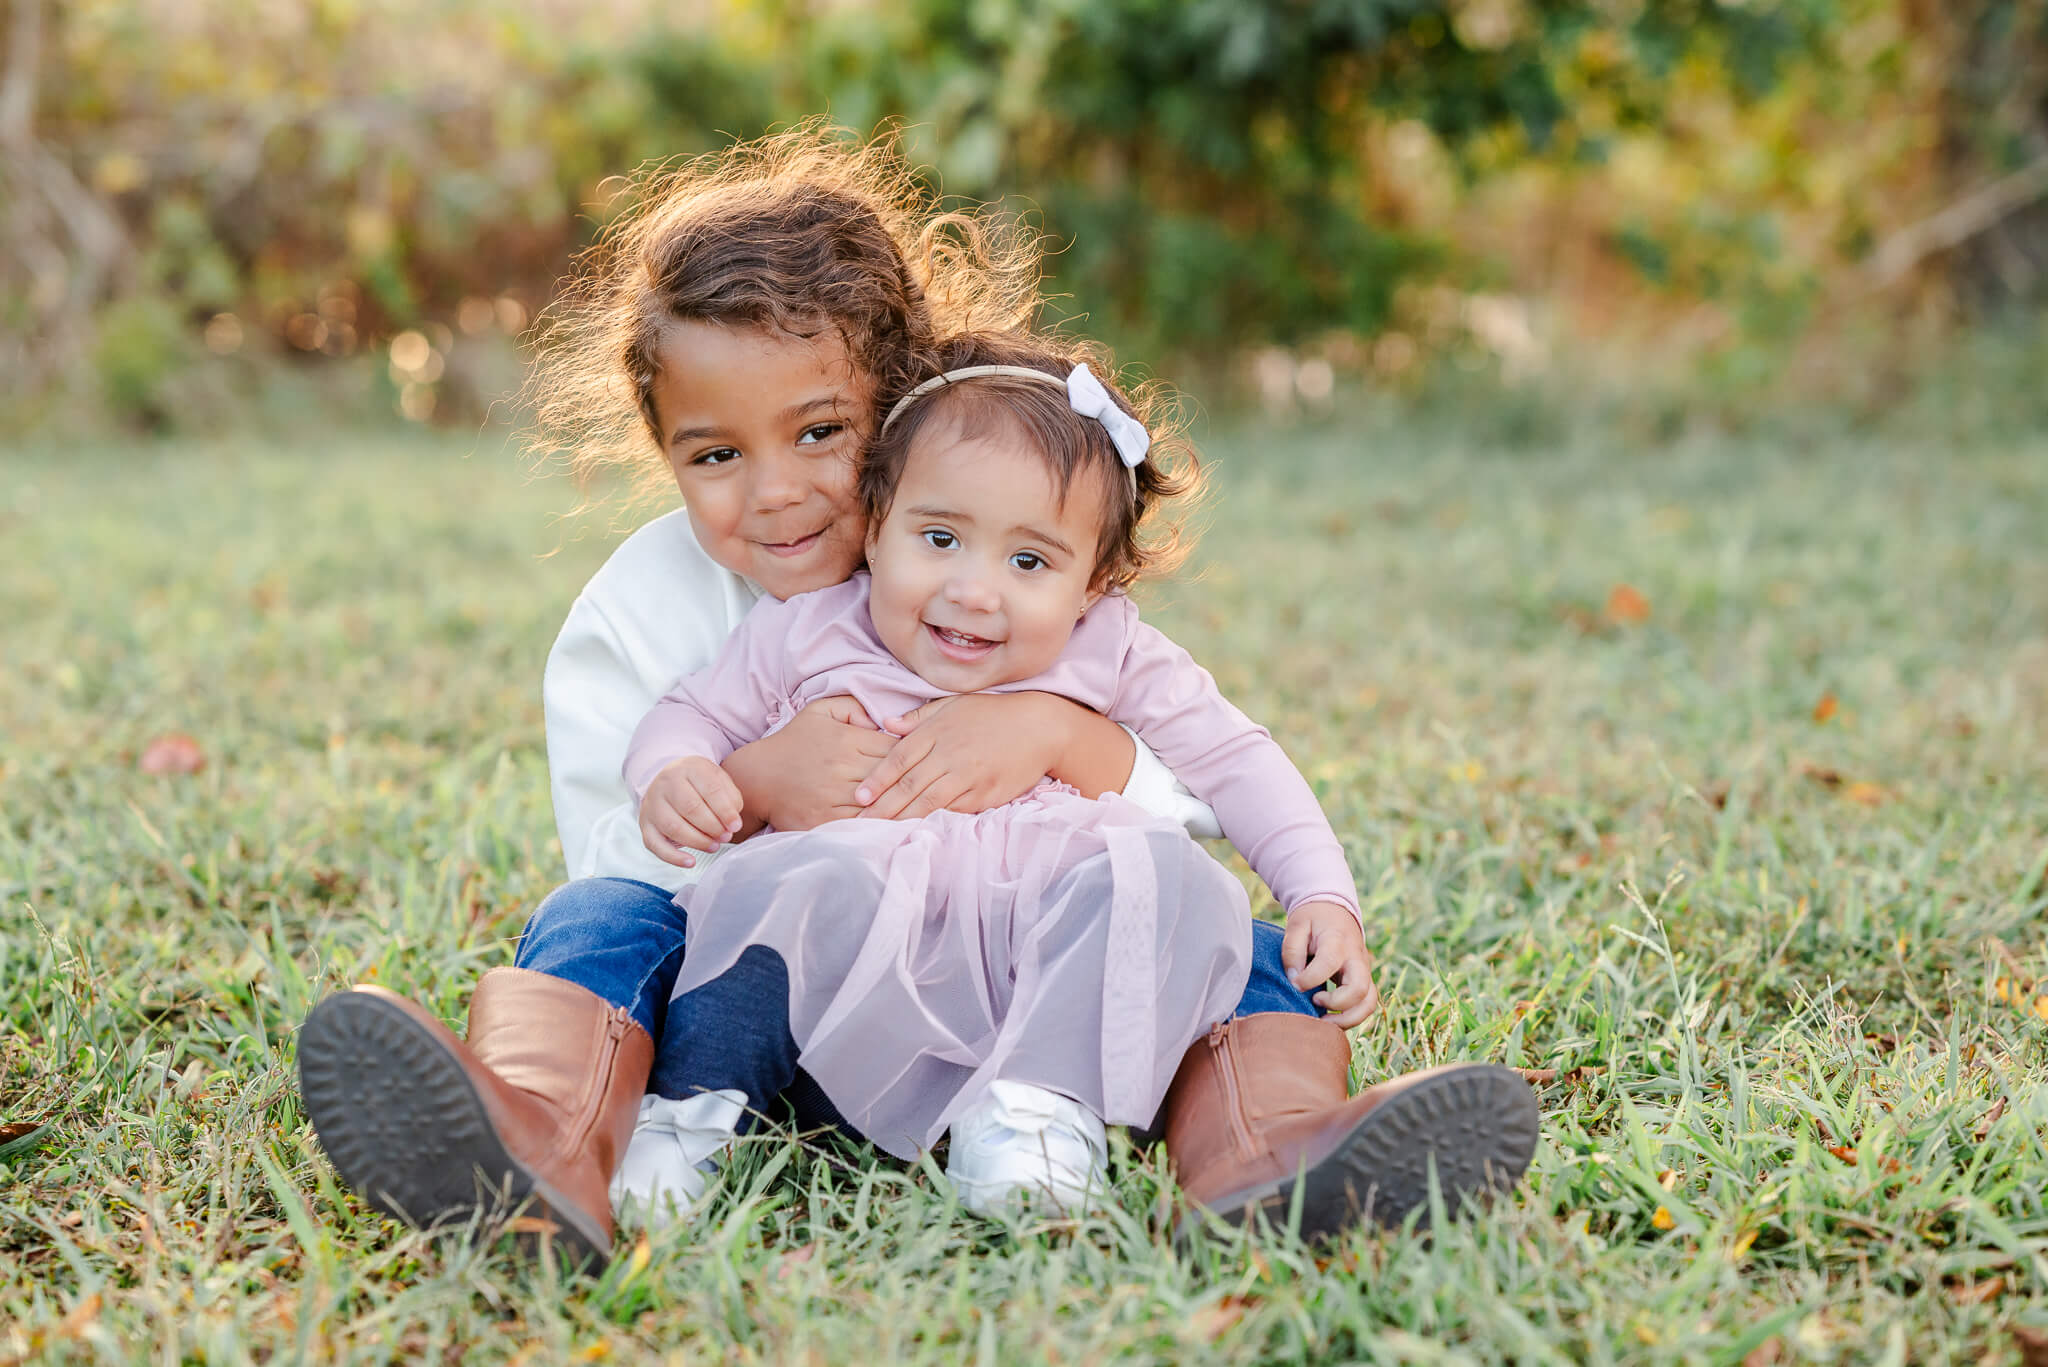 Two toddlers, who participate in preschool in Chesapeake, VA, sit on the grass. The younger one, who is wearing a purple dress, sits on her sister's lap.